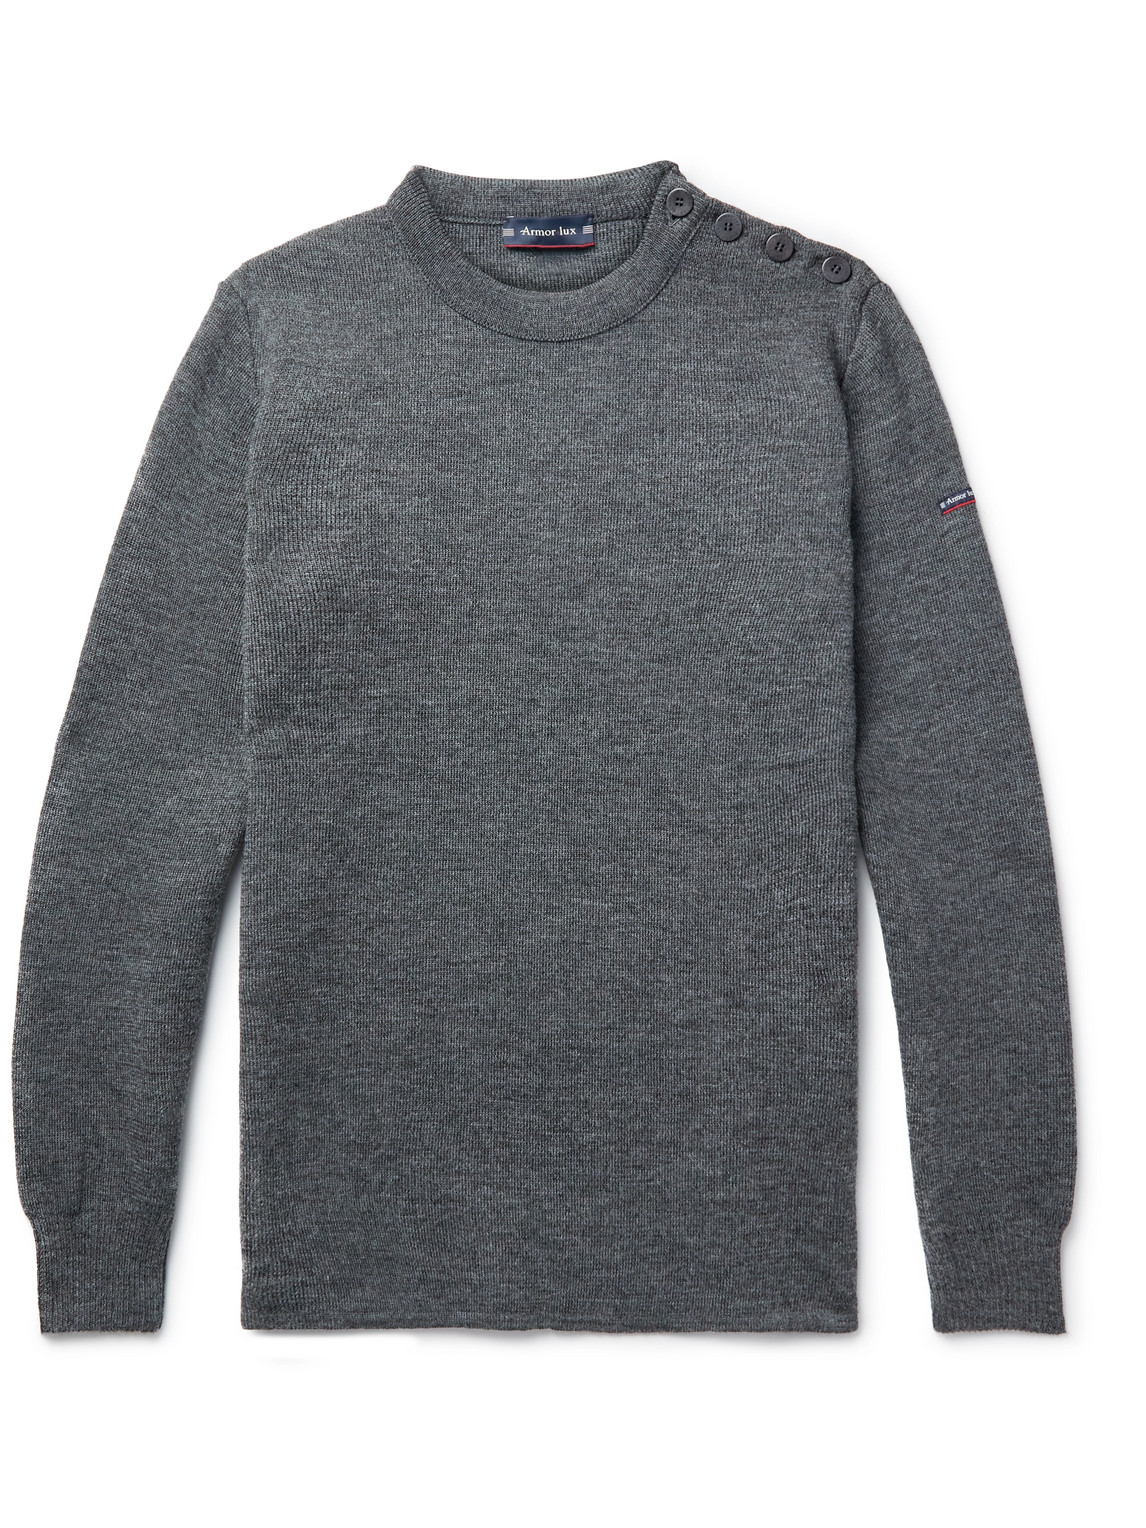 Armor-lux Fouesnant Plain Sailor Jumper In Wool Gris Chin Armor Lux In Grey  | ModeSens